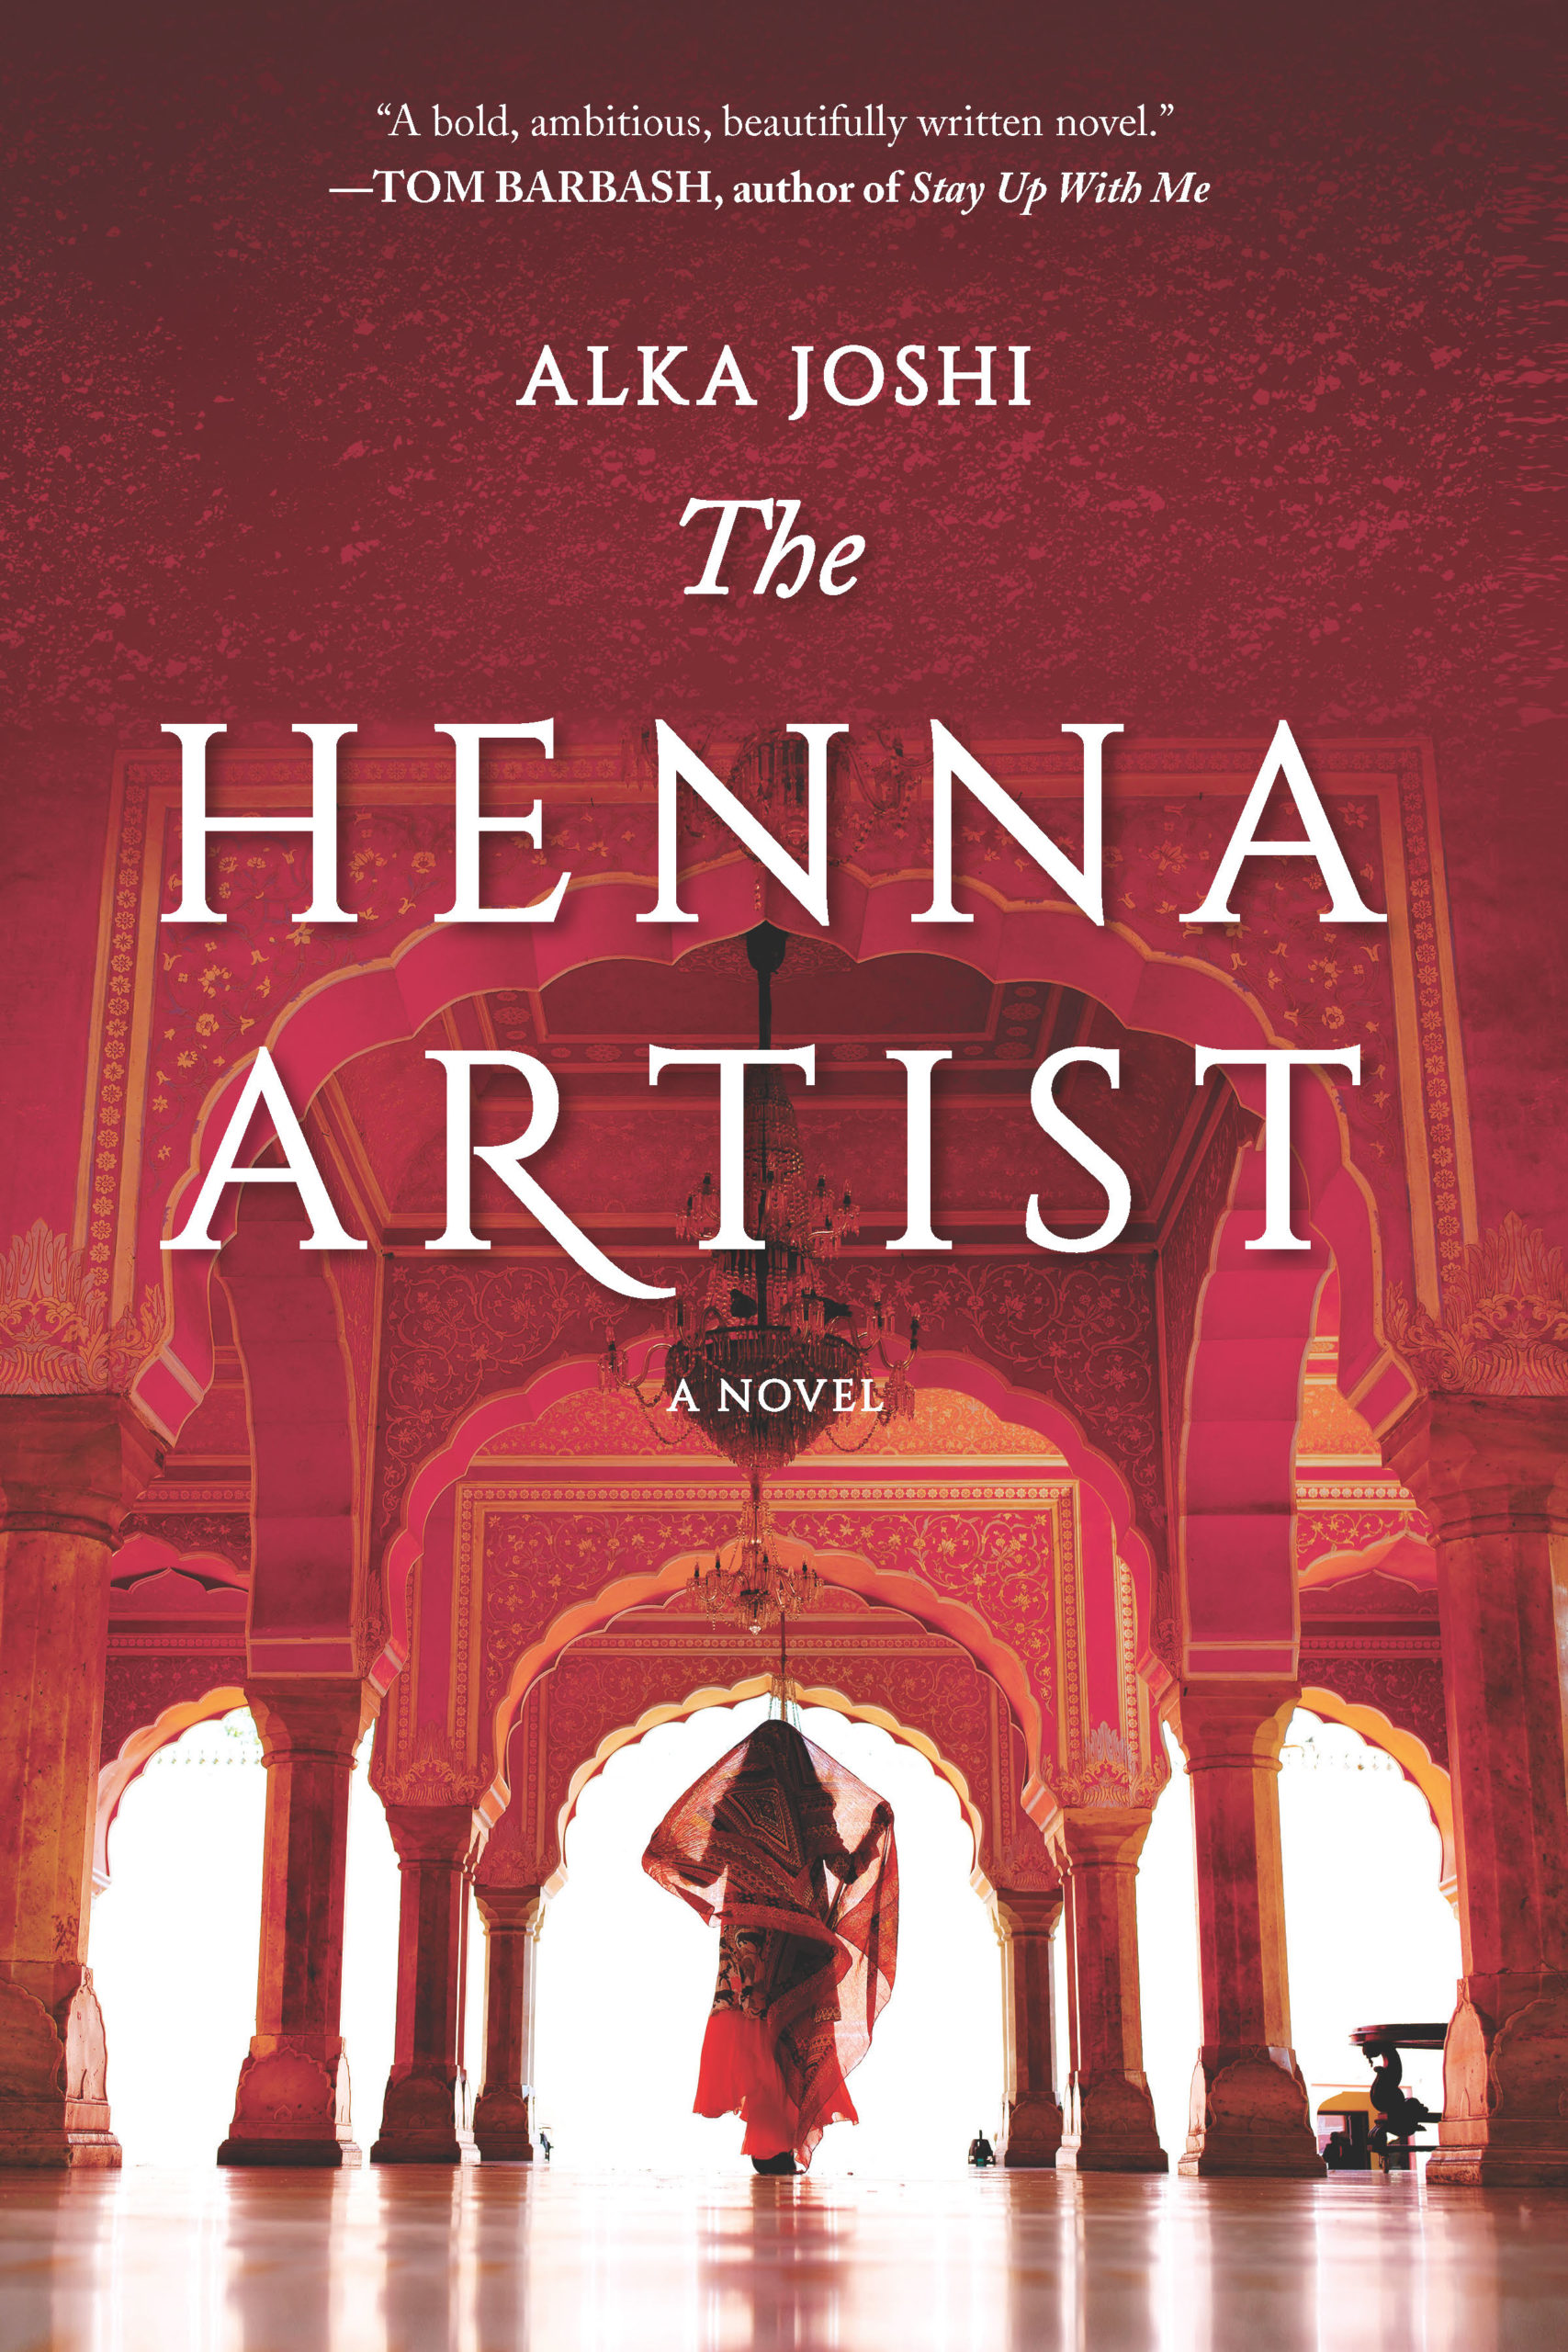 The Henna Artist by Alka Joshi (Review by Shelley Jomaa)